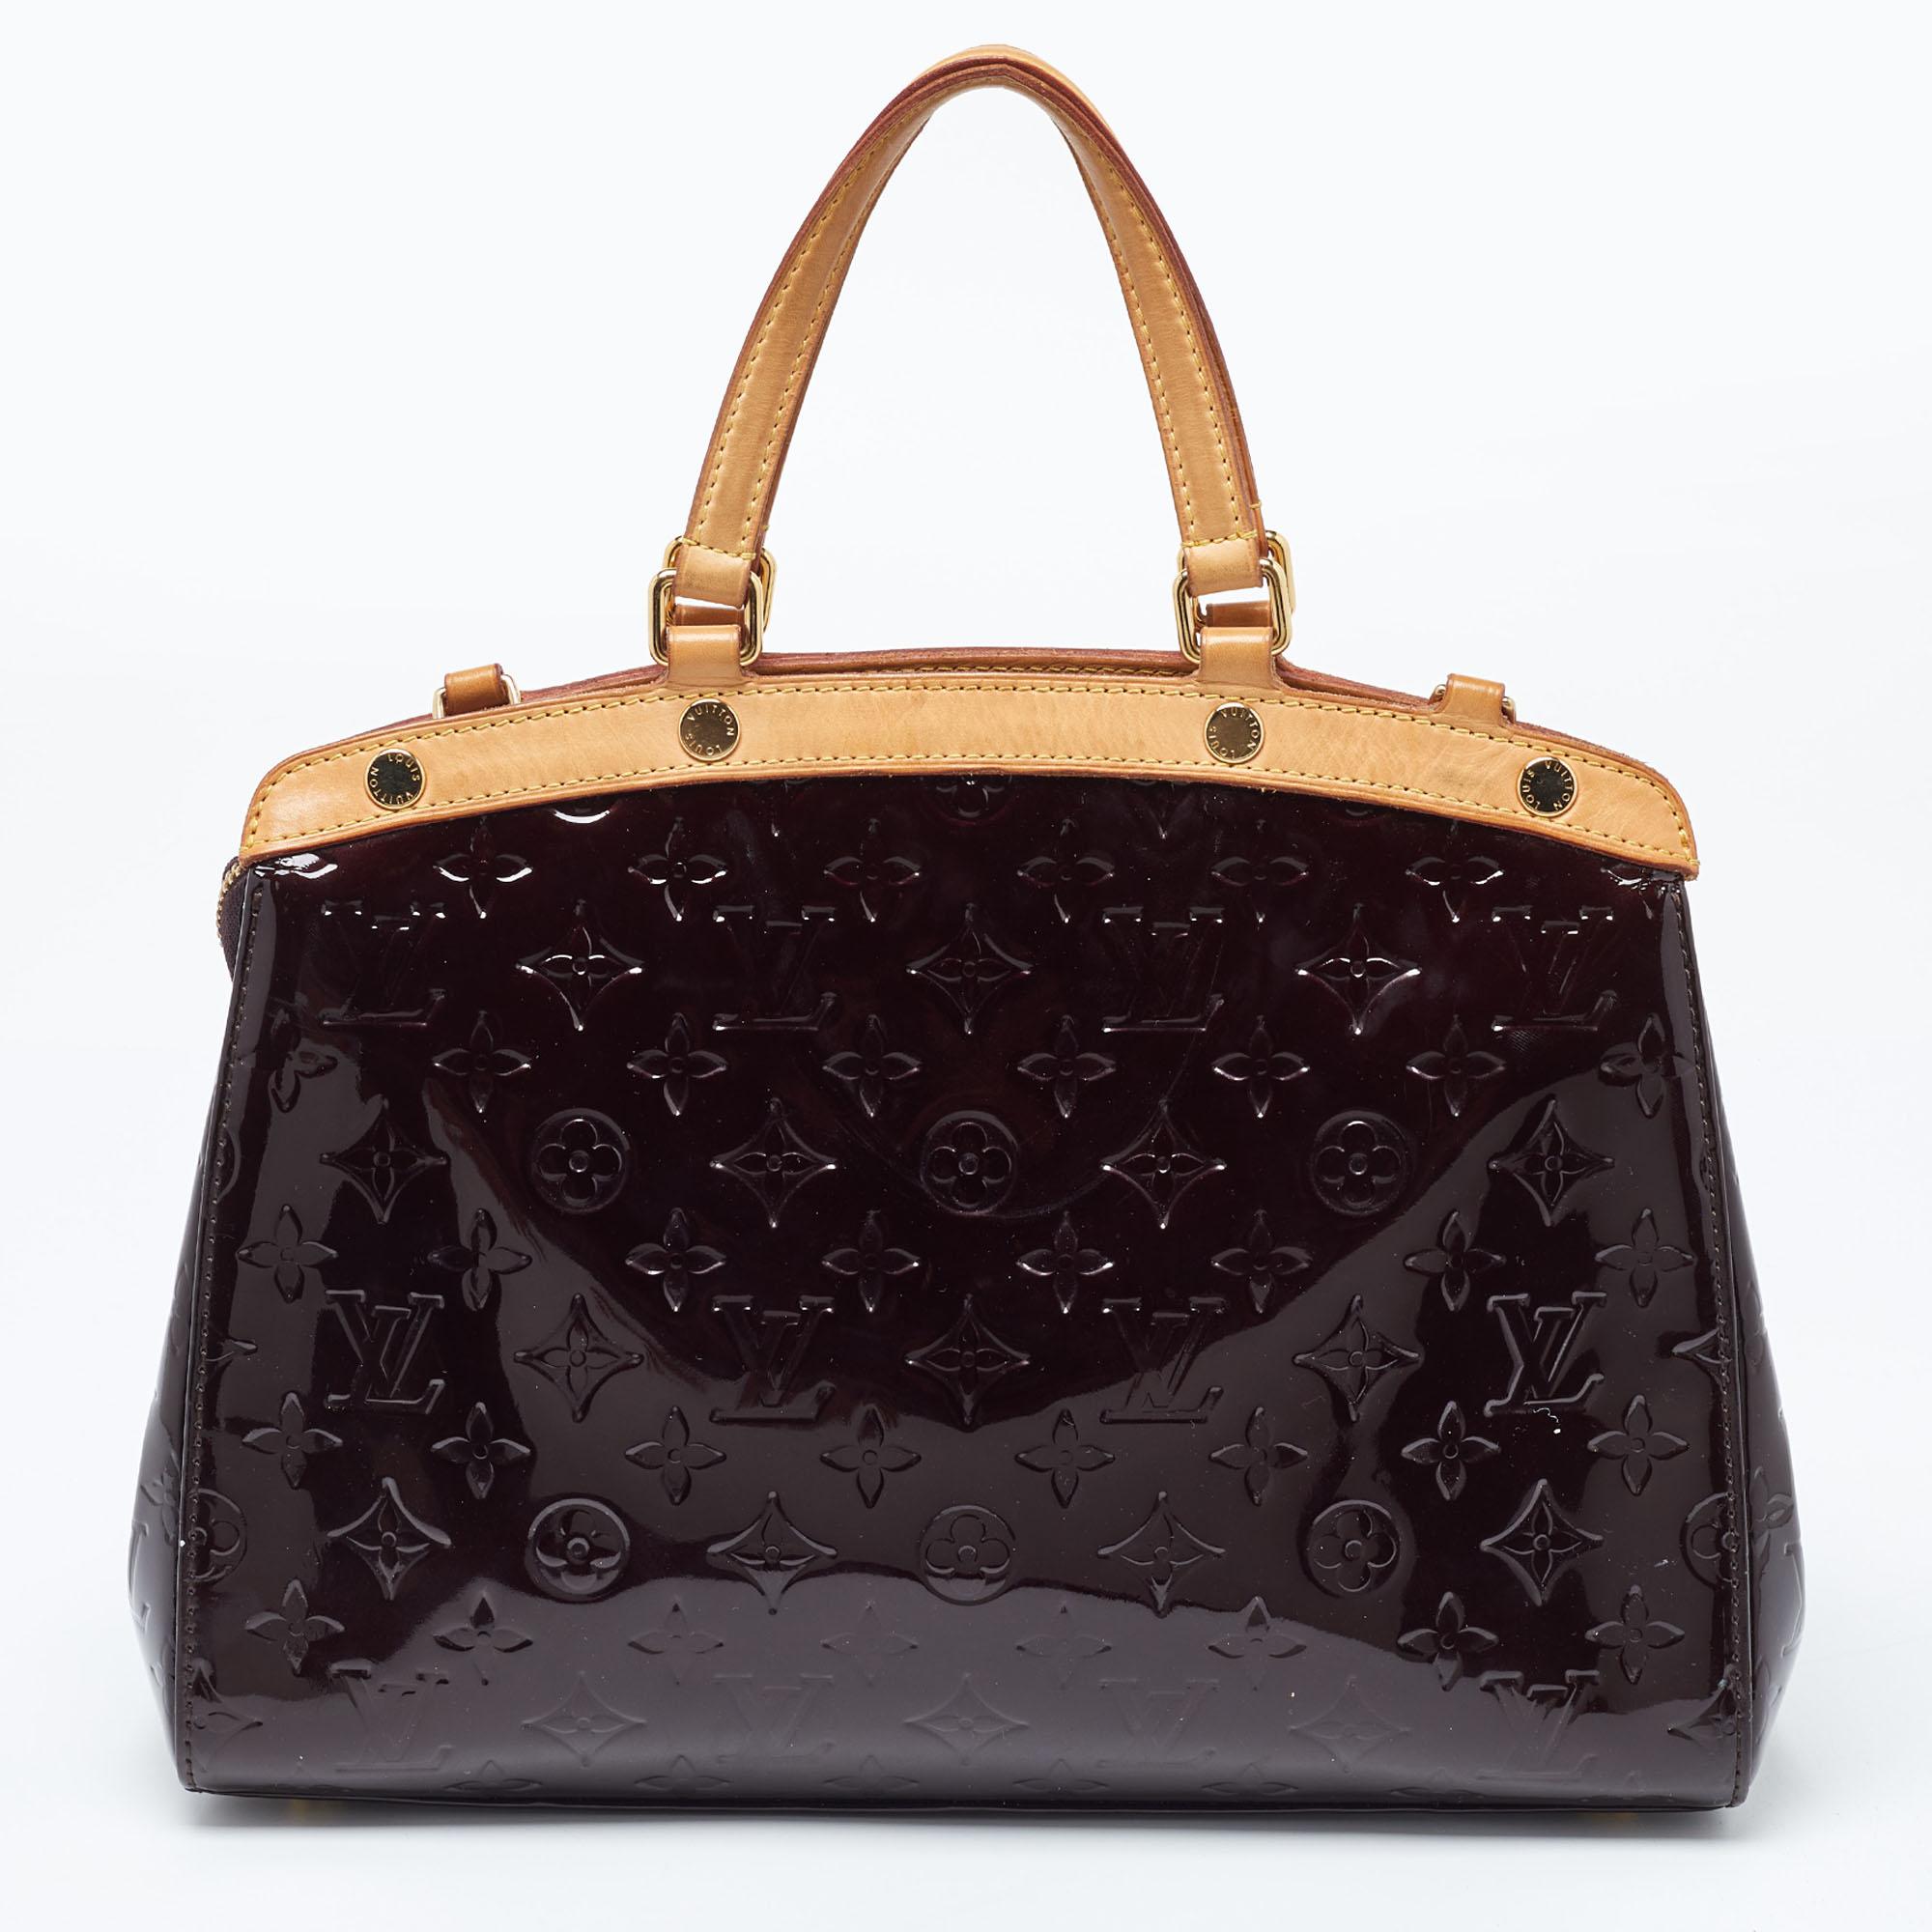 This Brea MM bag from the House of Louis Vuitton will definitely sway you away with its precise shape, style, and design. It is made from Amarante Monogram Vernis into a structured, neat silhouette. It flaunts gold-toned fittings, dual top handles,